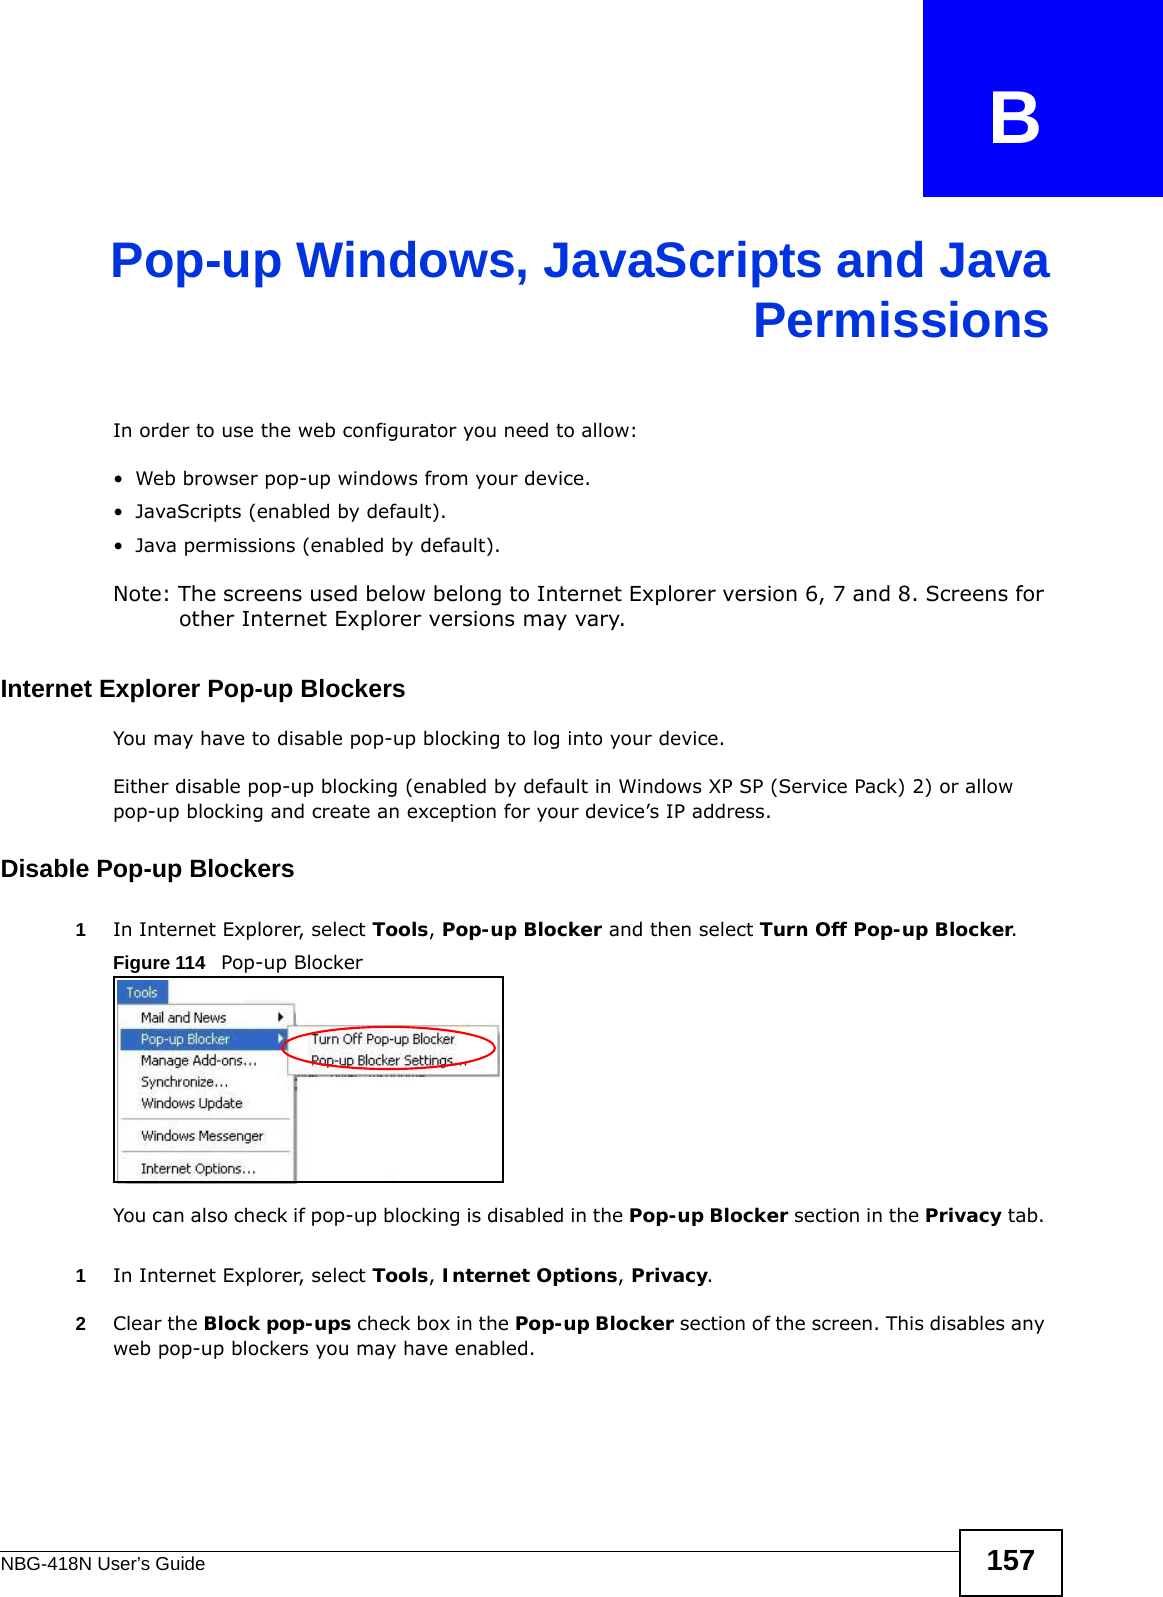 NBG-418N User’s Guide 157APPENDIX   BPop-up Windows, JavaScripts and JavaPermissionsIn order to use the web configurator you need to allow:• Web browser pop-up windows from your device.• JavaScripts (enabled by default).• Java permissions (enabled by default).Note: The screens used below belong to Internet Explorer version 6, 7 and 8. Screens for other Internet Explorer versions may vary.Internet Explorer Pop-up BlockersYou may have to disable pop-up blocking to log into your device. Either disable pop-up blocking (enabled by default in Windows XP SP (Service Pack) 2) or allow pop-up blocking and create an exception for your device’s IP address.Disable Pop-up Blockers1In Internet Explorer, select Tools, Pop-up Blocker and then select Turn Off Pop-up Blocker. Figure 114   Pop-up BlockerYou can also check if pop-up blocking is disabled in the Pop-up Blocker section in the Privacy tab. 1In Internet Explorer, select Tools, Internet Options, Privacy.2Clear the Block pop-ups check box in the Pop-up Blocker section of the screen. This disables any web pop-up blockers you may have enabled. 